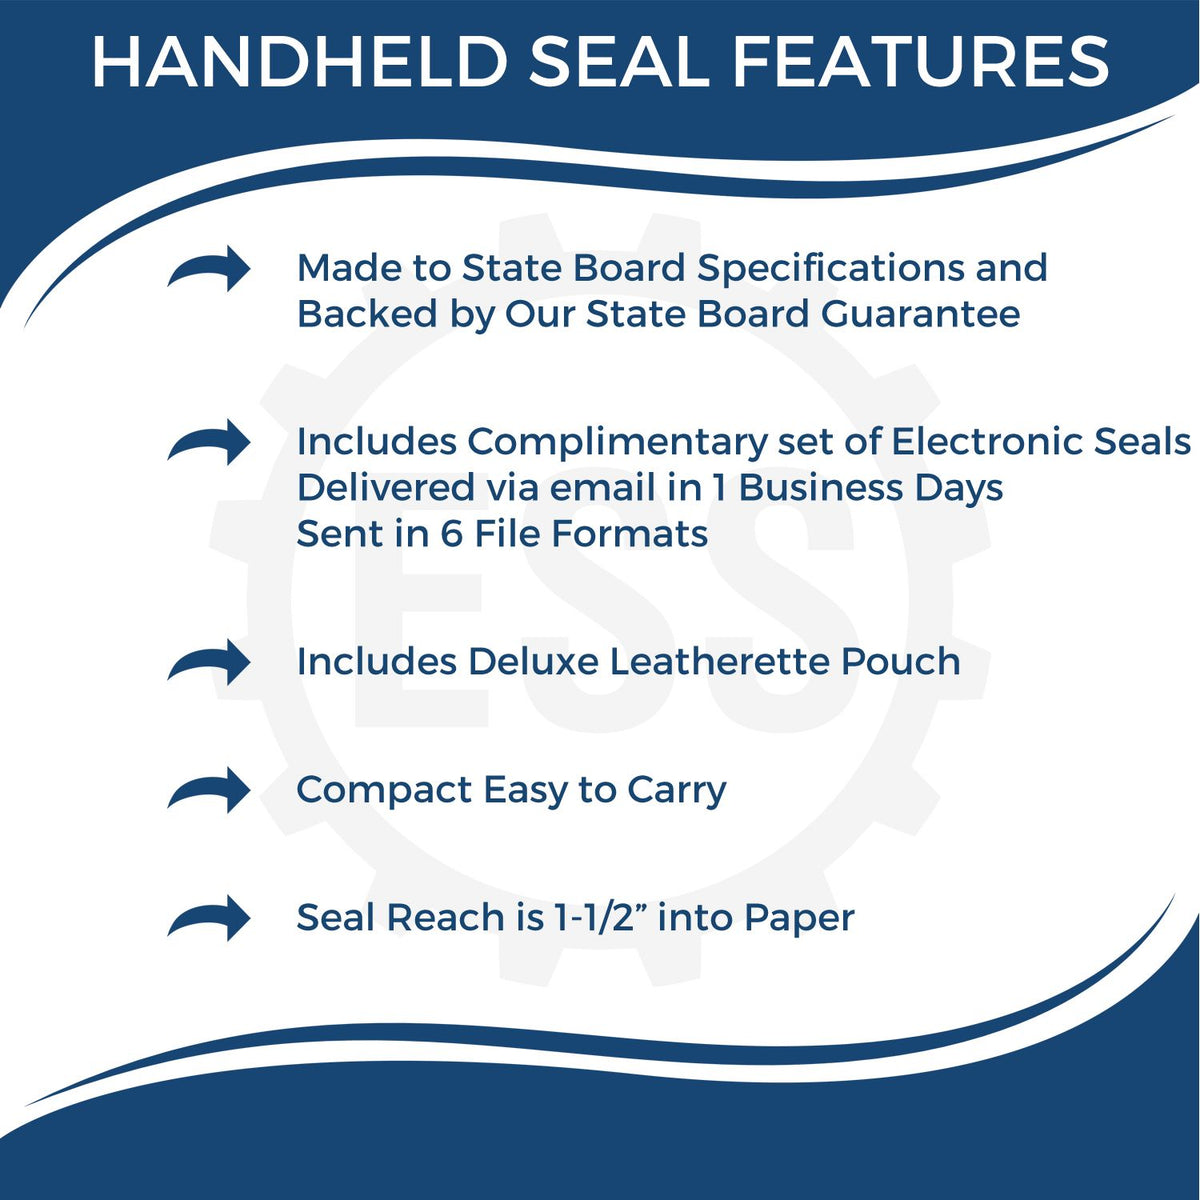 A picture of an infographic highlighting the selling points for the Handheld Iowa Land Surveyor Seal